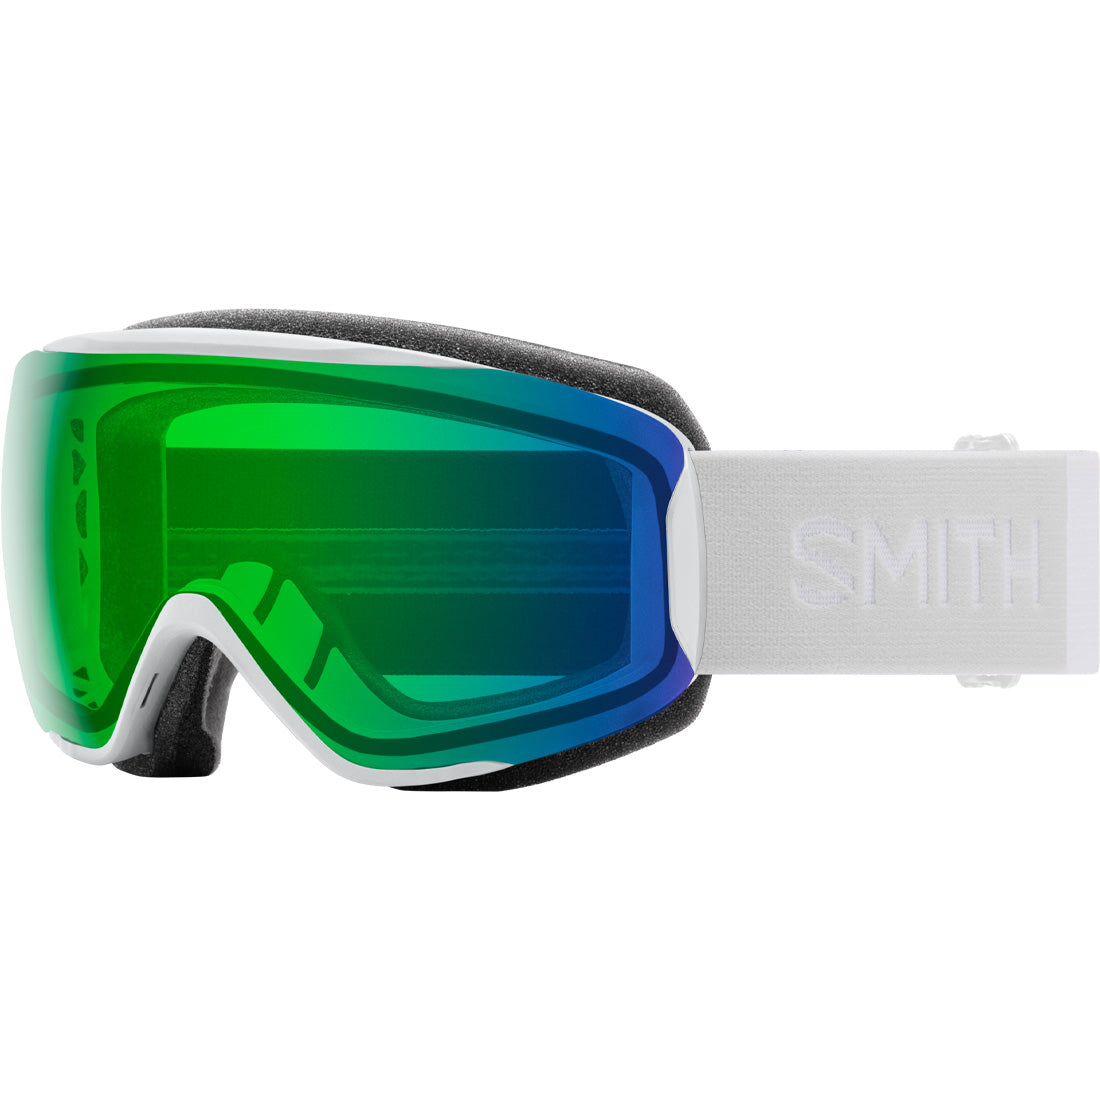 Smith Moment Goggle - Women's